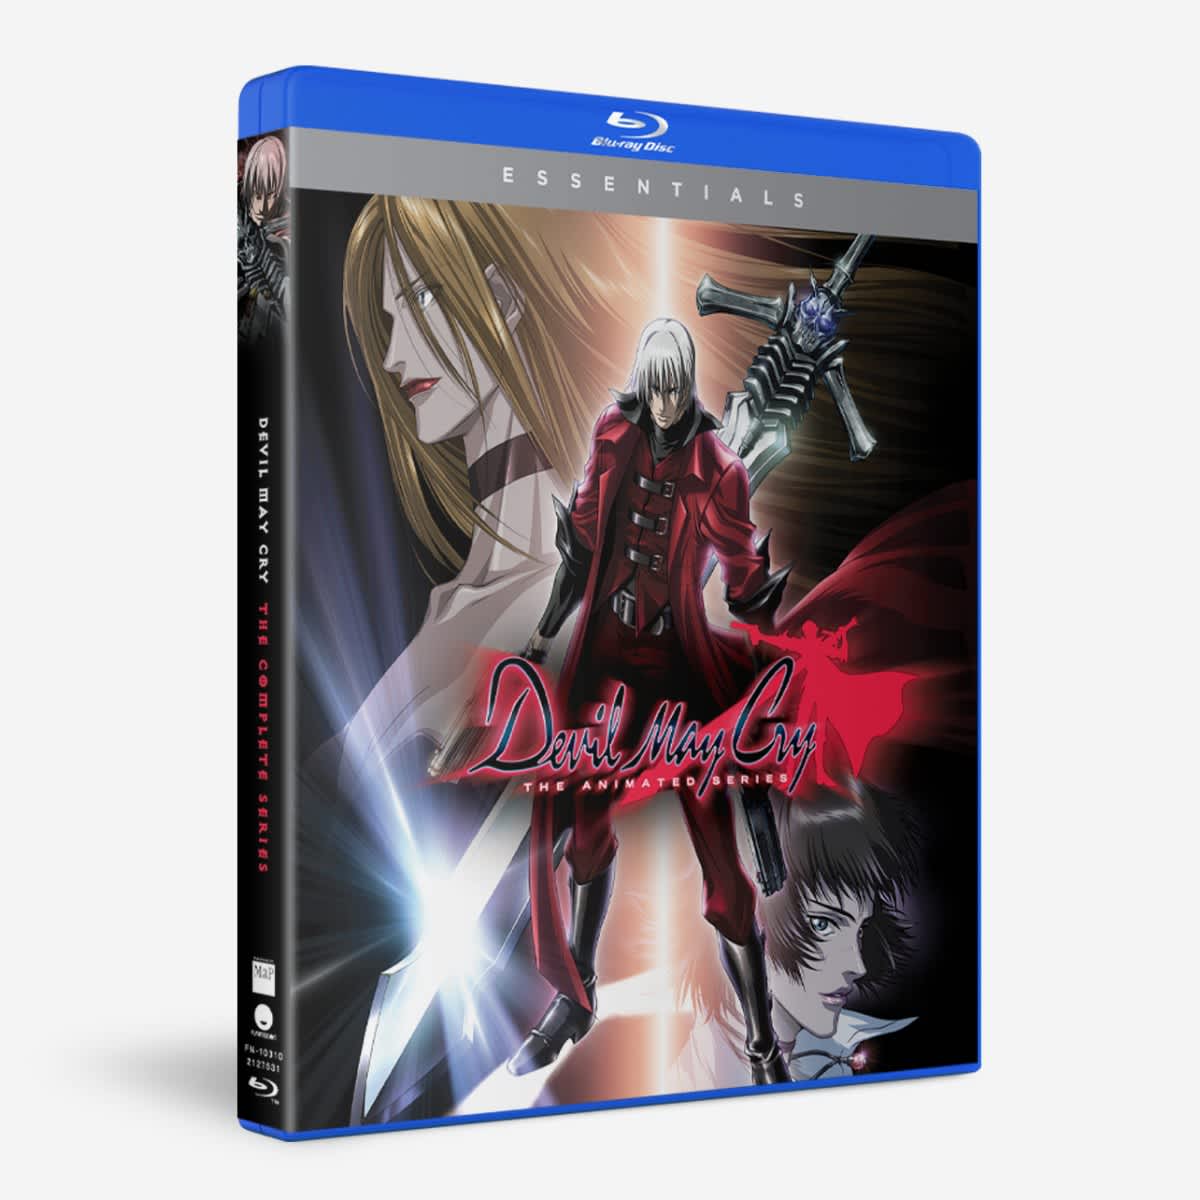 Shop Devil May Cry The Complete Series - Essentials - BD | Funimation